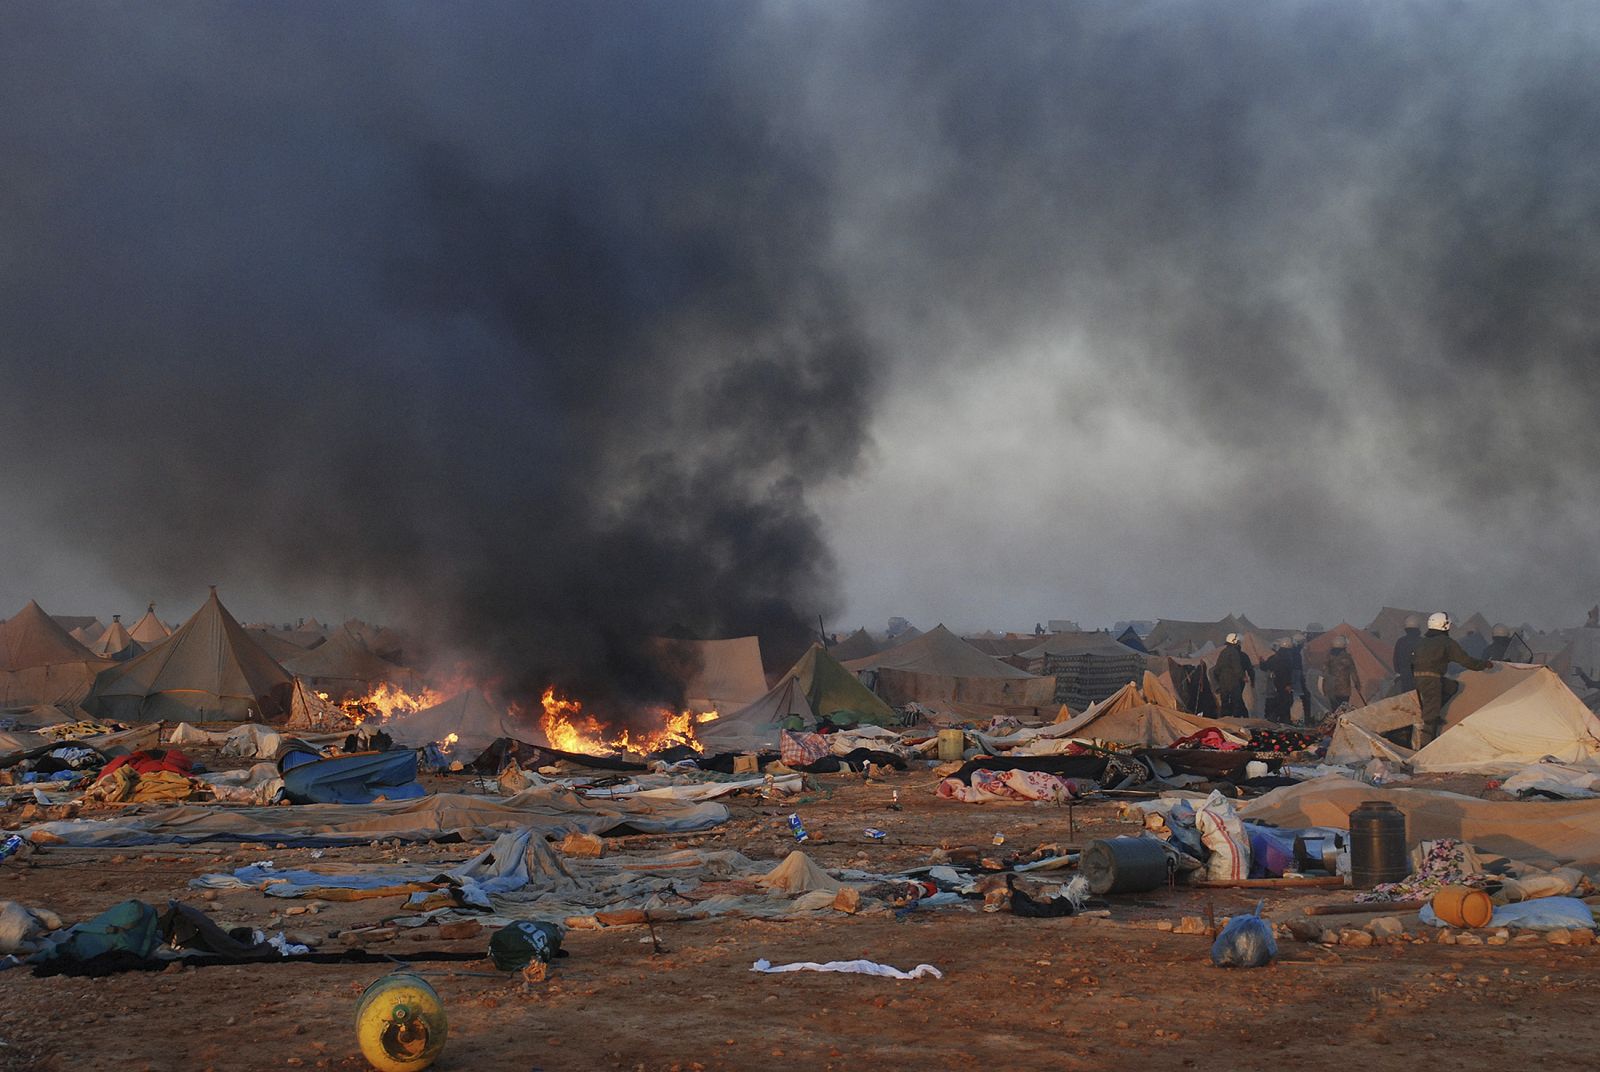 Tent burns after Moroccan security forces broke up the tent camp on the outskirts of Western Sahara's capital, Laayoune